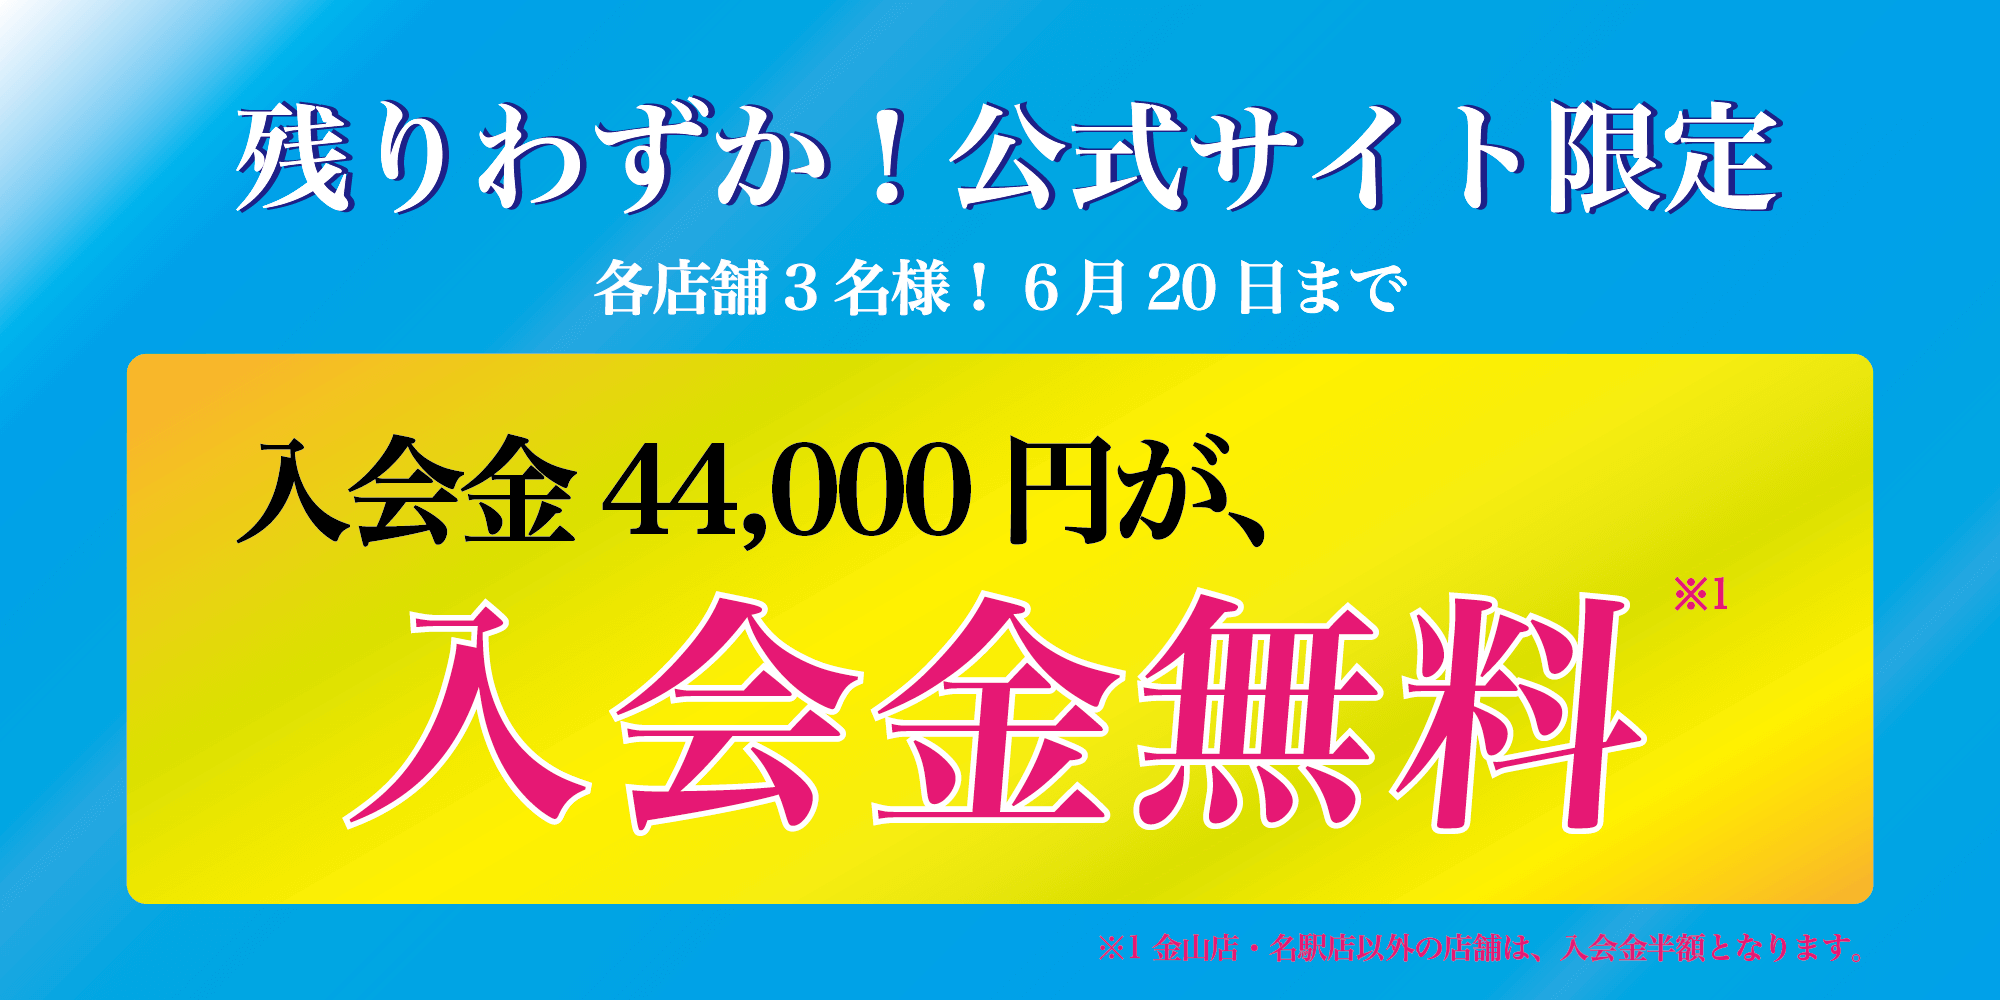 campaign banner